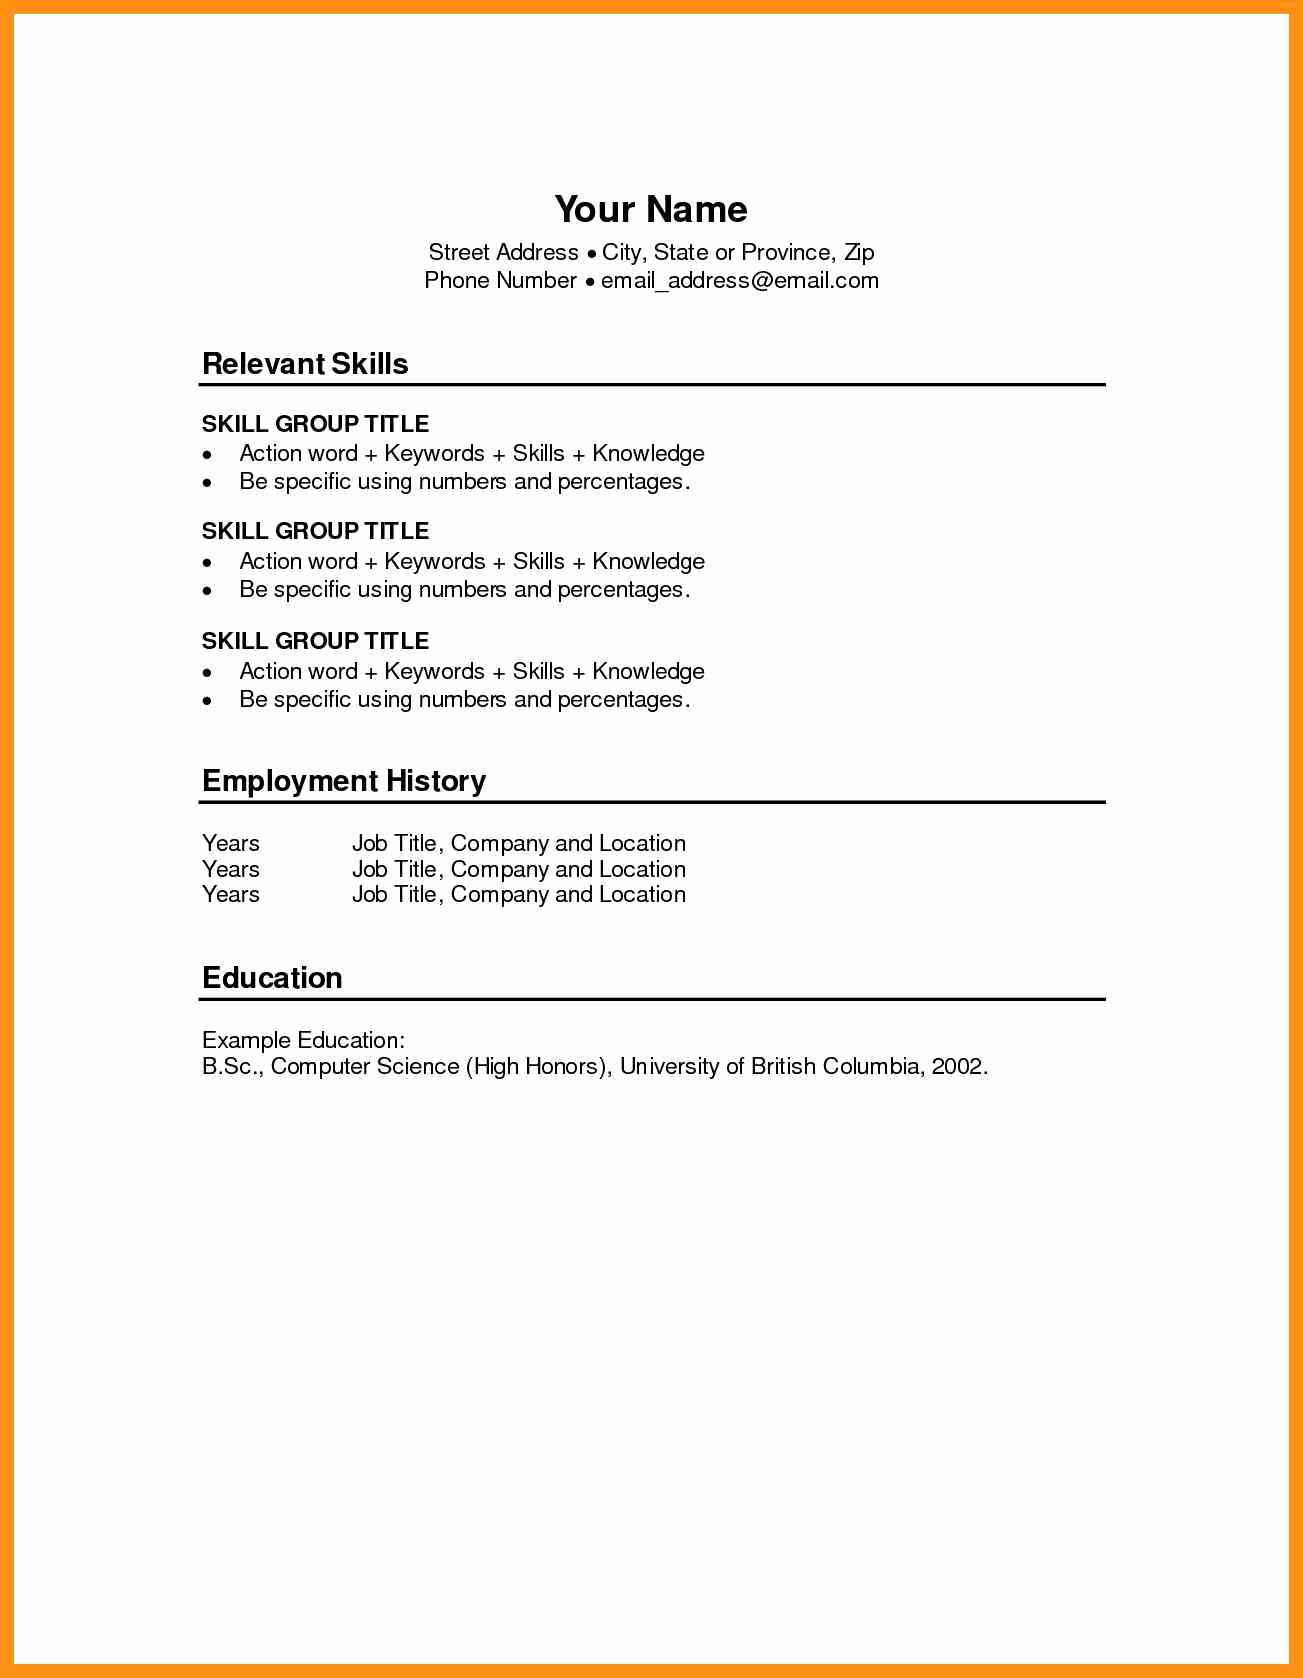 Resume Template Ms Word 2010 Awesome Resume Templates for Word 2010